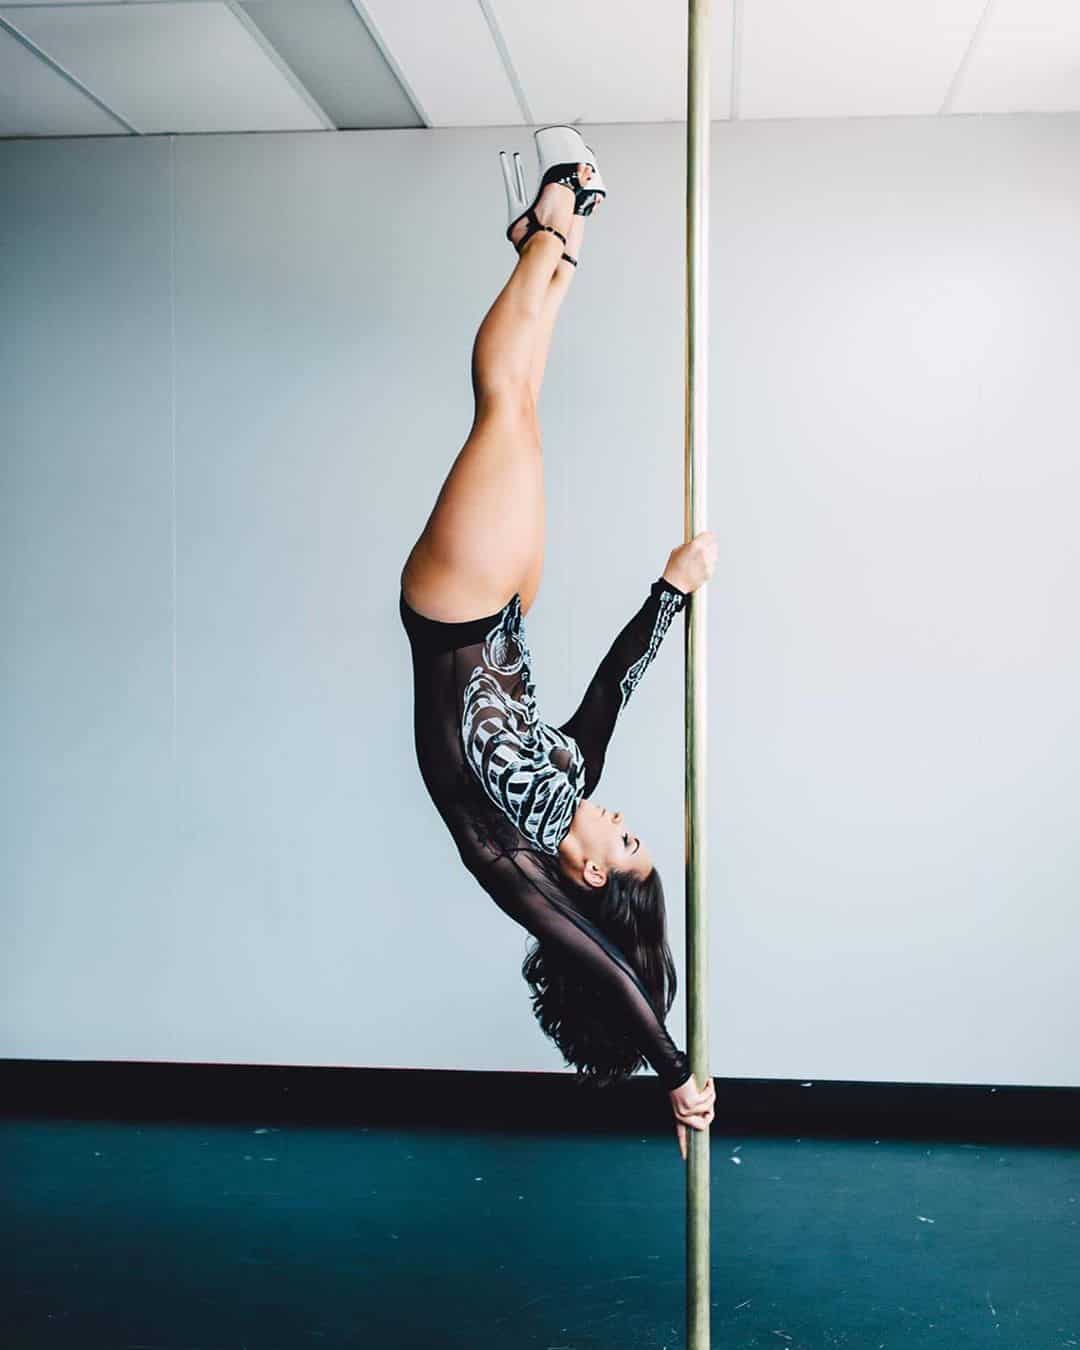 woman upside down on pole for photoshoot wearing heels and skeleton outfit